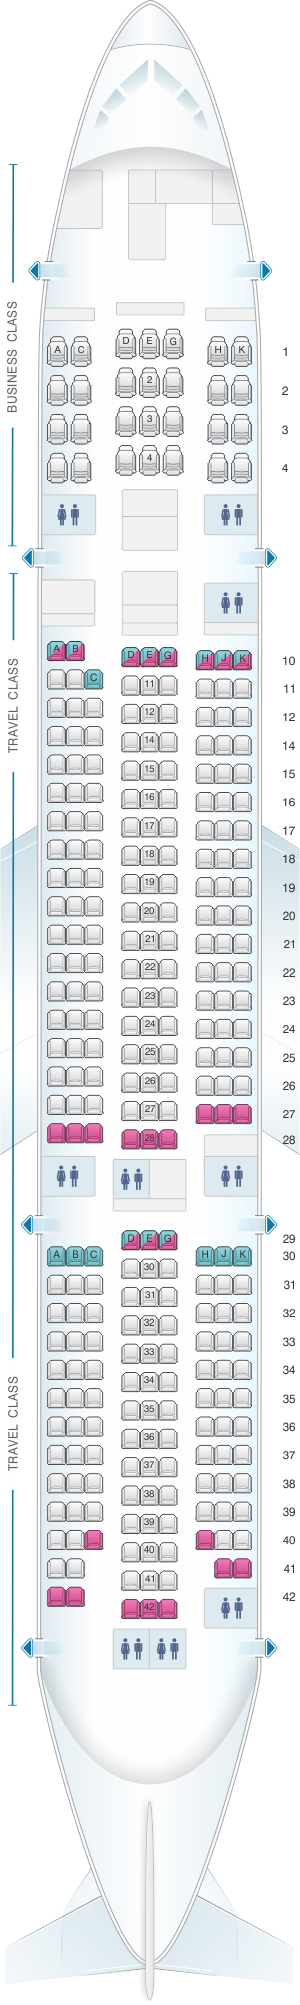 Seat map for Asiana Airlines Boeing B777 200ER 300PAX V1